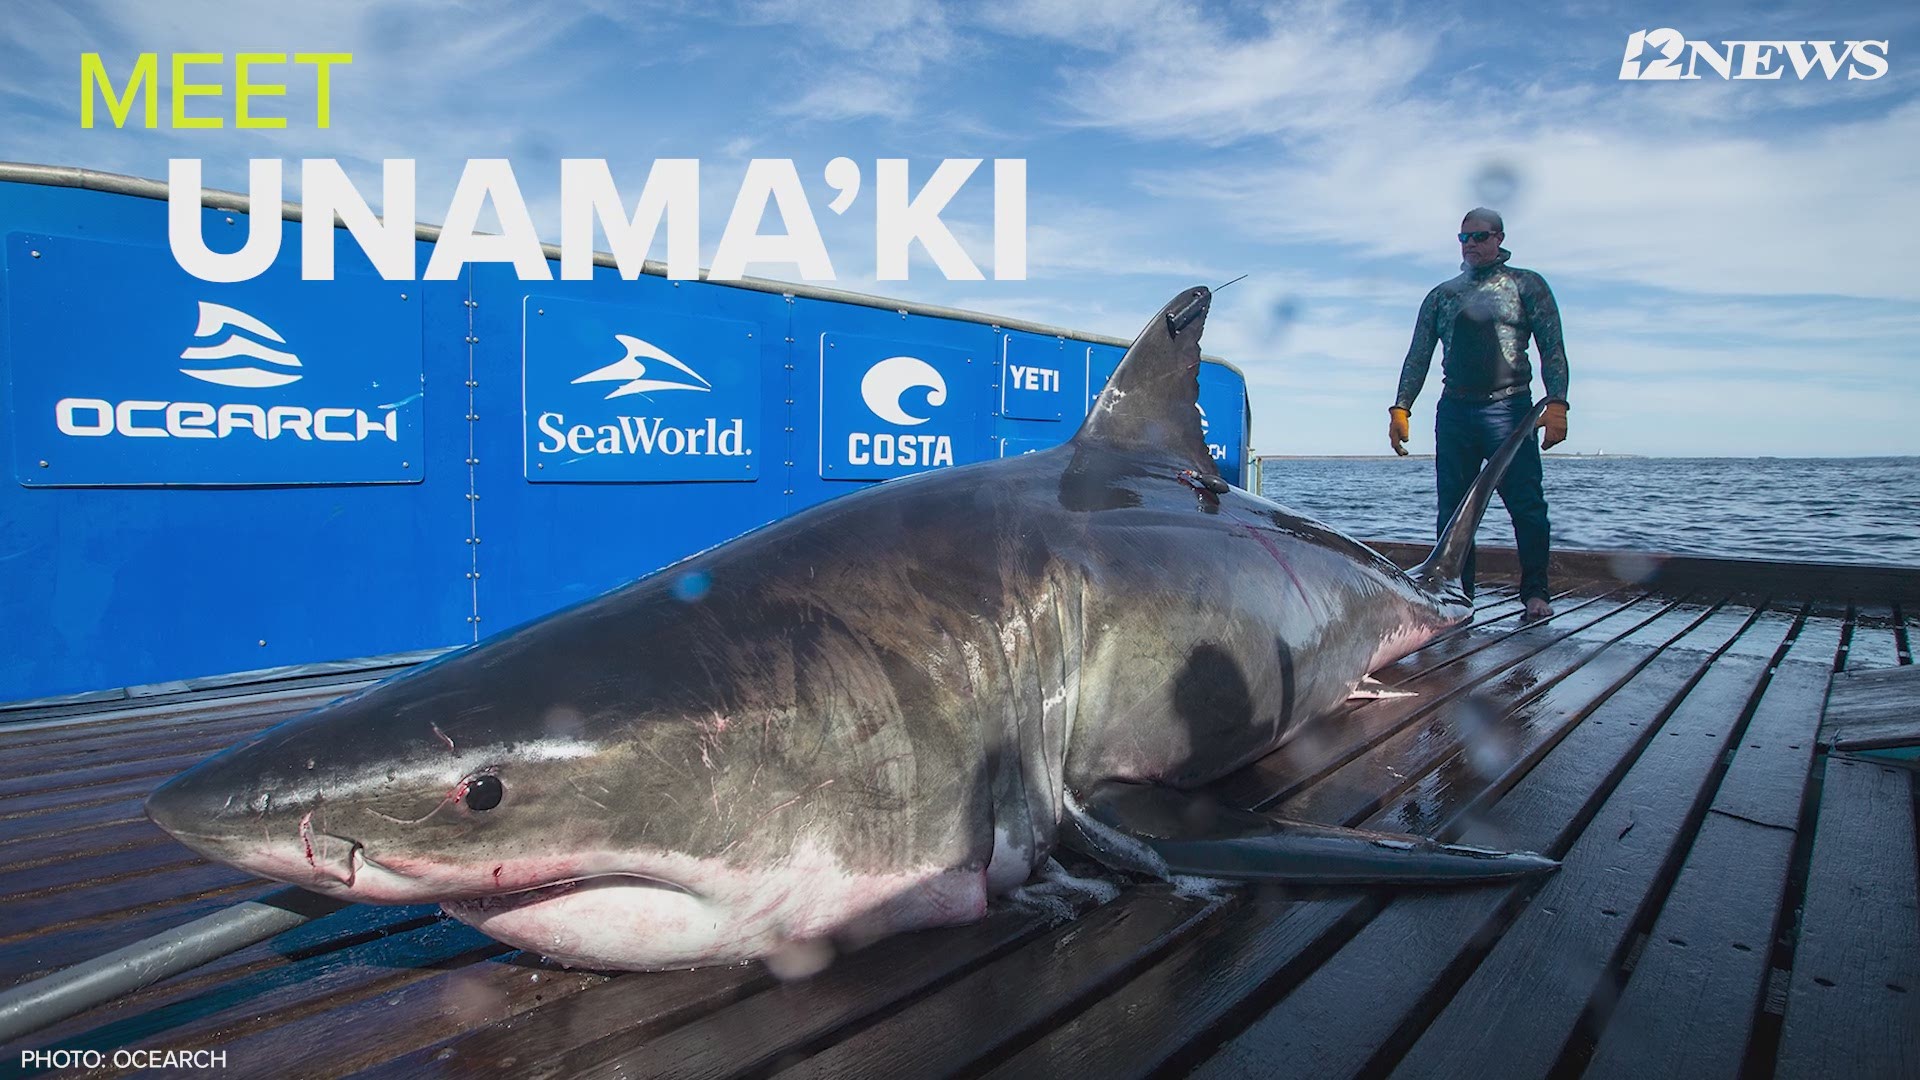 “It’s the first time we’ve tracked a white shark to this area off the coast of Louisiana," researchers said.